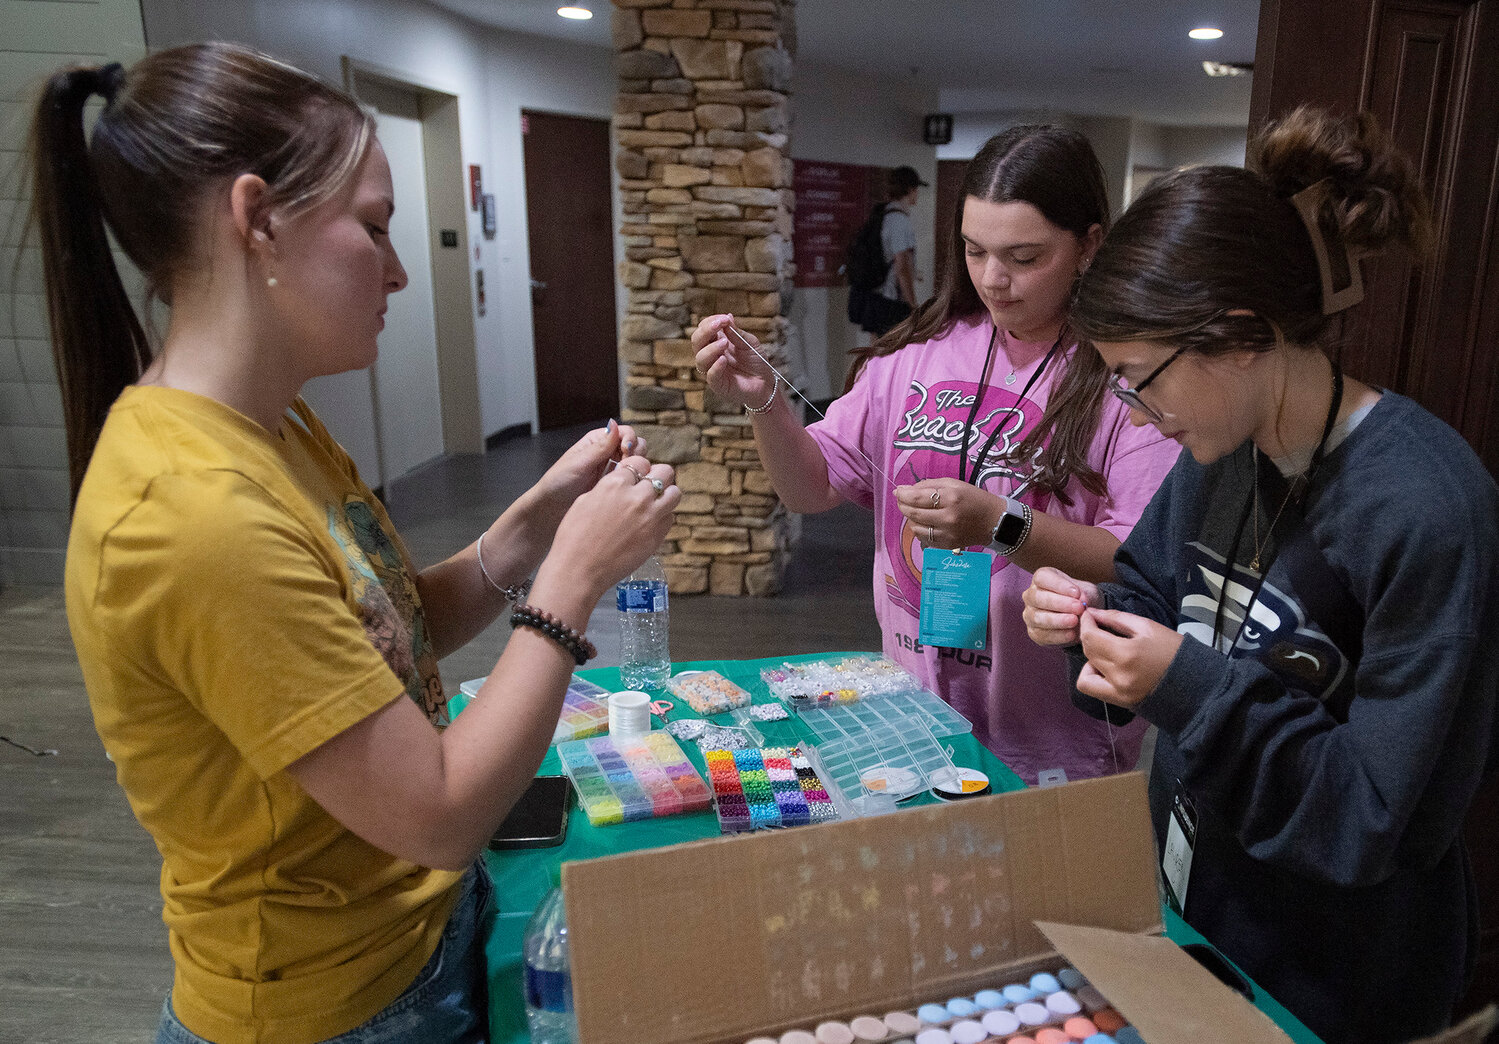 Ansley Vickers, Kayla Maddox and Lauren Richardson, from left, make friendship bracelets during Confluence 2023 at Eagle's Landing First Baptist Church in McDonough, Ga., Saturday, Sept. 23, 2023. The three attend Georgia Southern - Armstrong. (Index/Henry Durand)